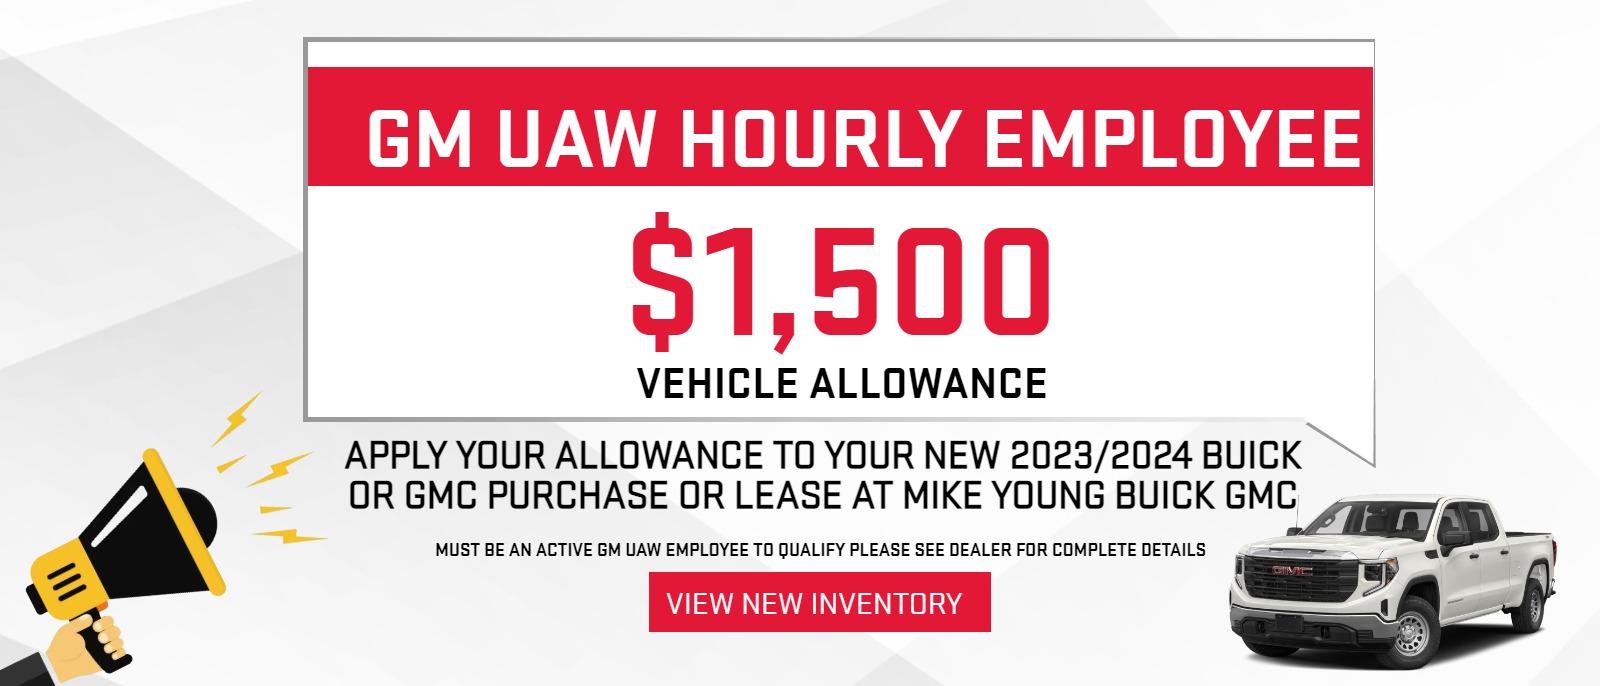 GM UAW Hourly Employee $1,500 Vehicle Allowance
Apply your Allowance to your New 2023/2024 Buick or GMC Purchase Or Lease at Mike Young Buick GMC